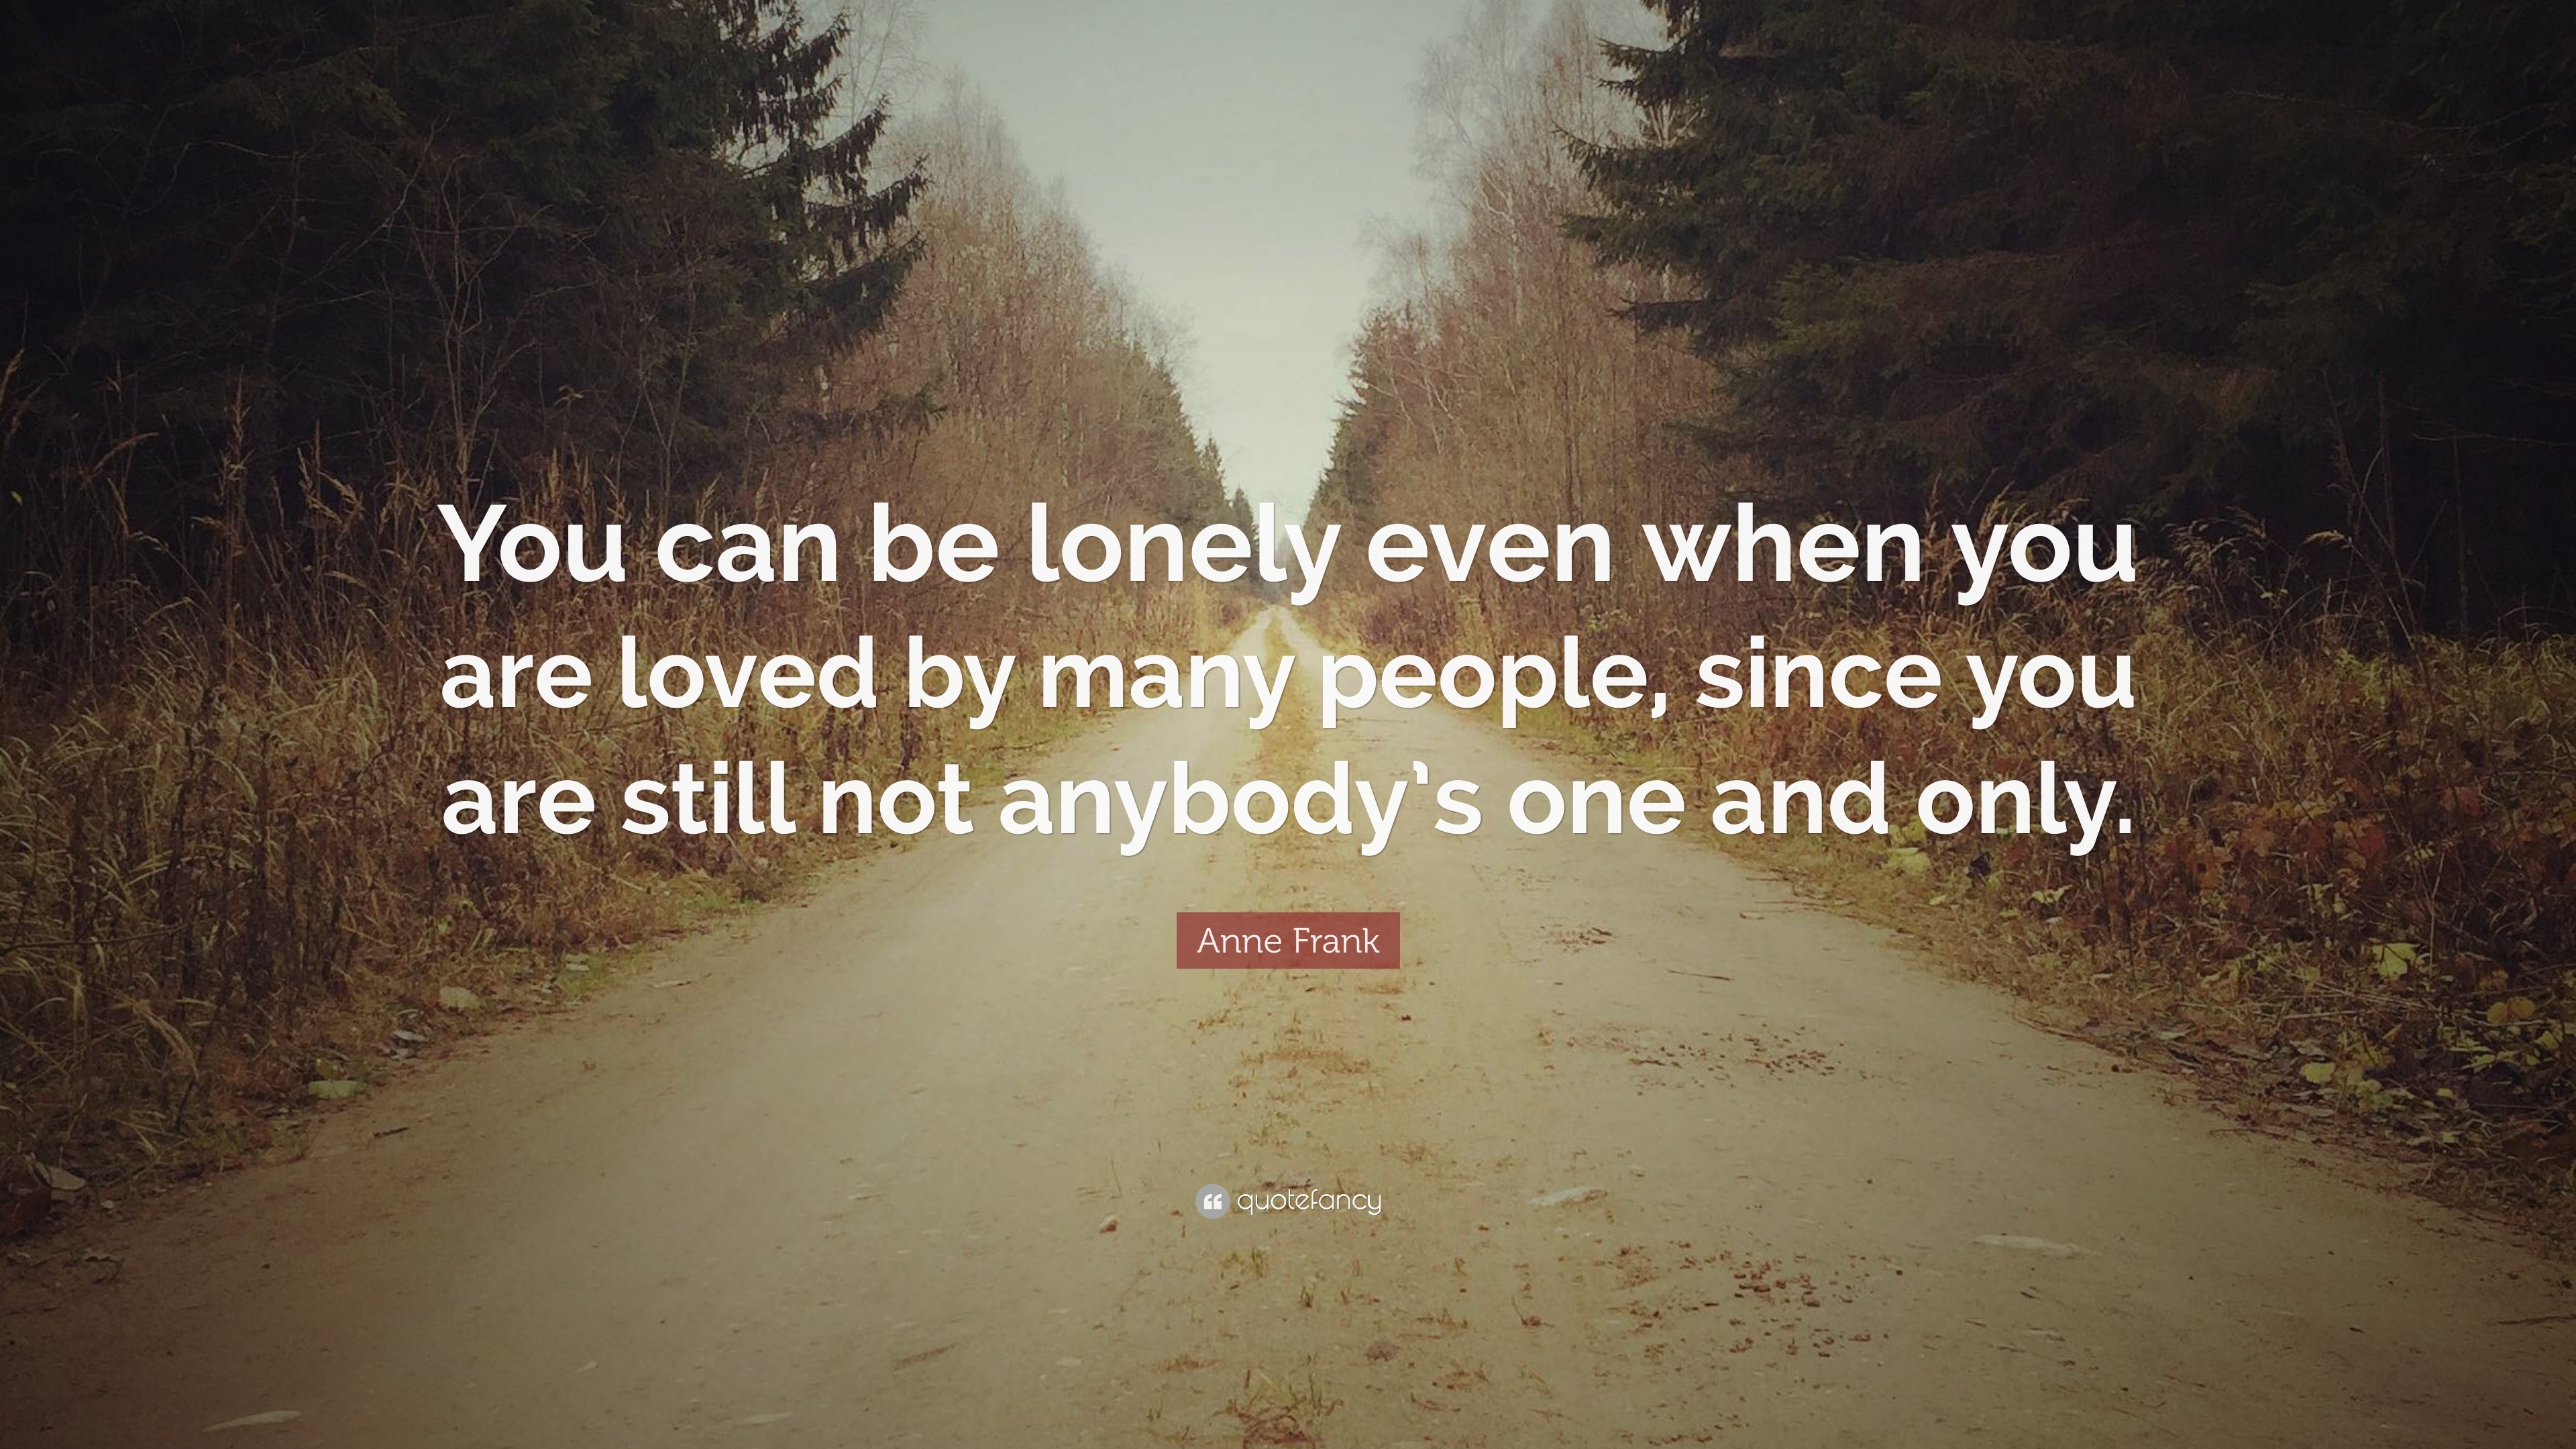 Anne Frank Quote: “You can be lonely even when you are loved by many ...